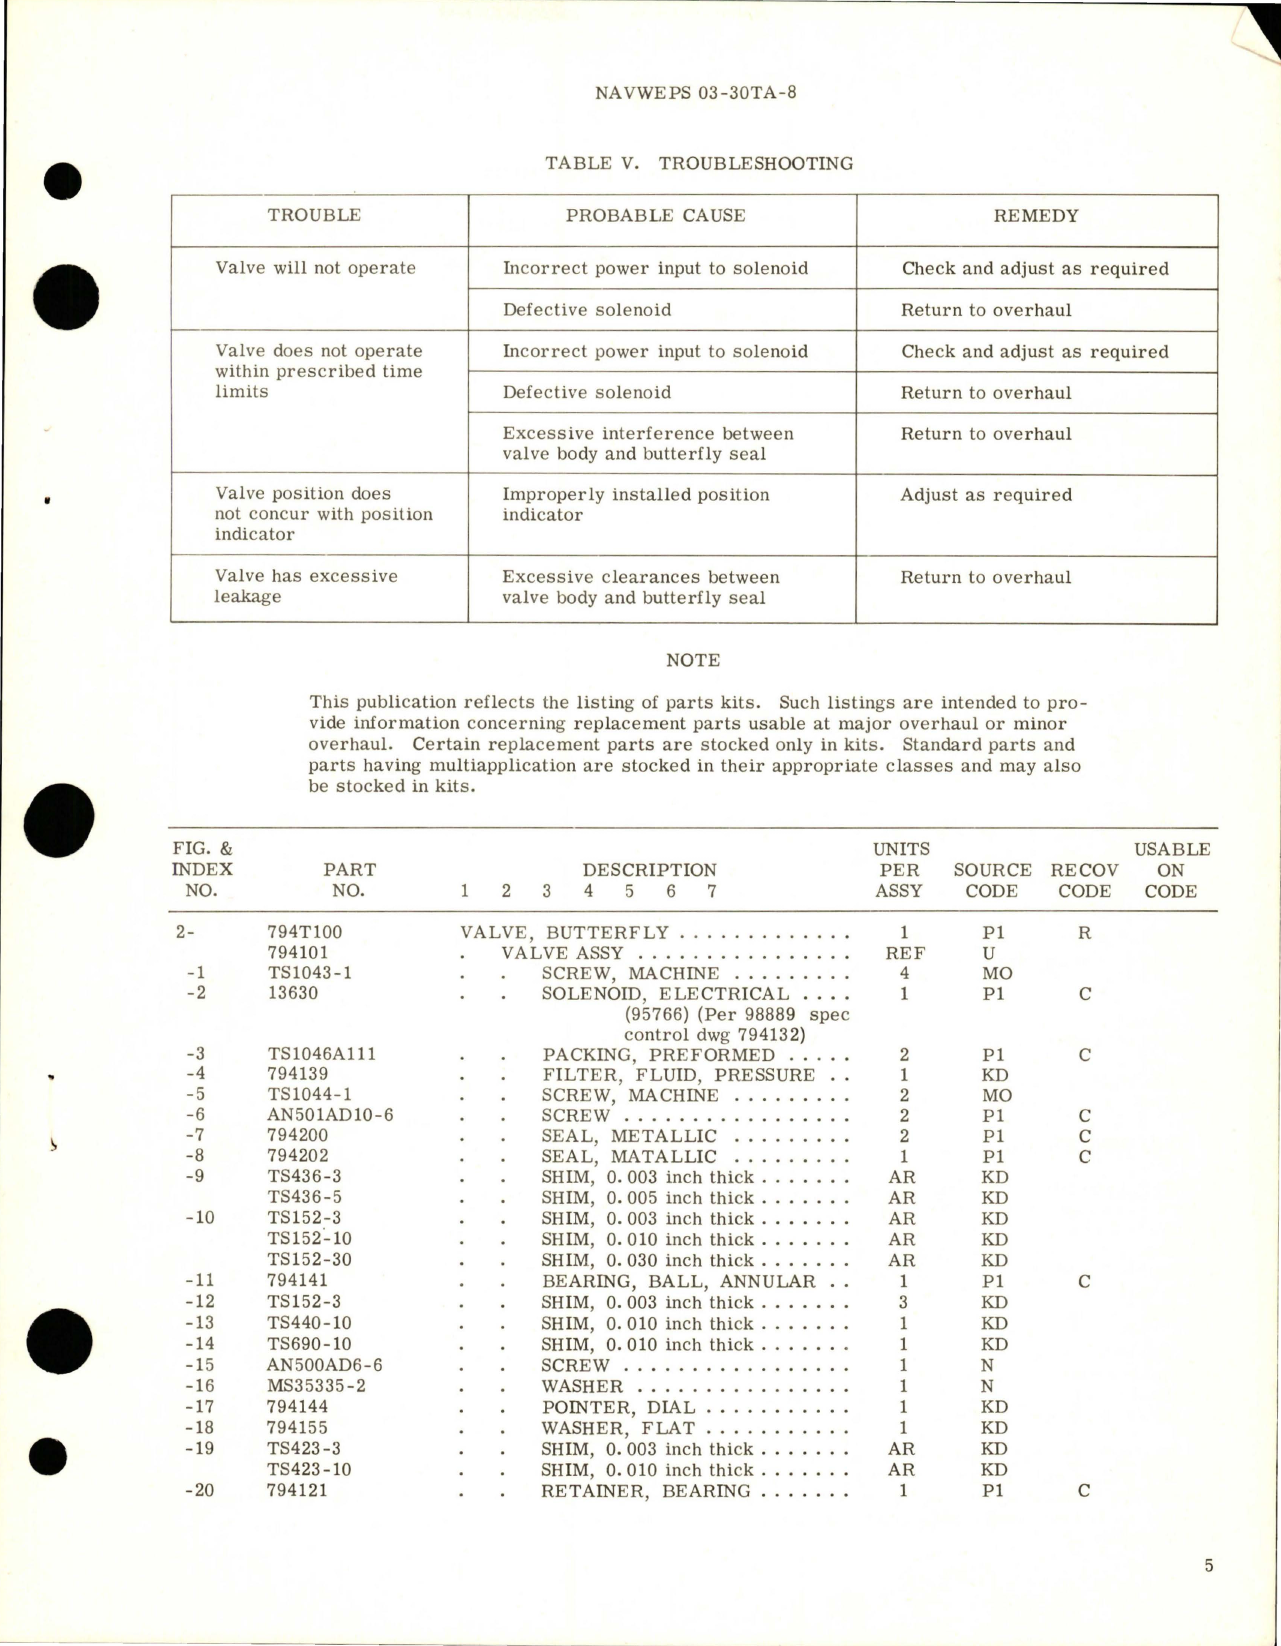 Sample page 5 from AirCorps Library document: Overhaul Instructions with Illustrated Parts Breakdown for Butterfly Valve - Part 794T100